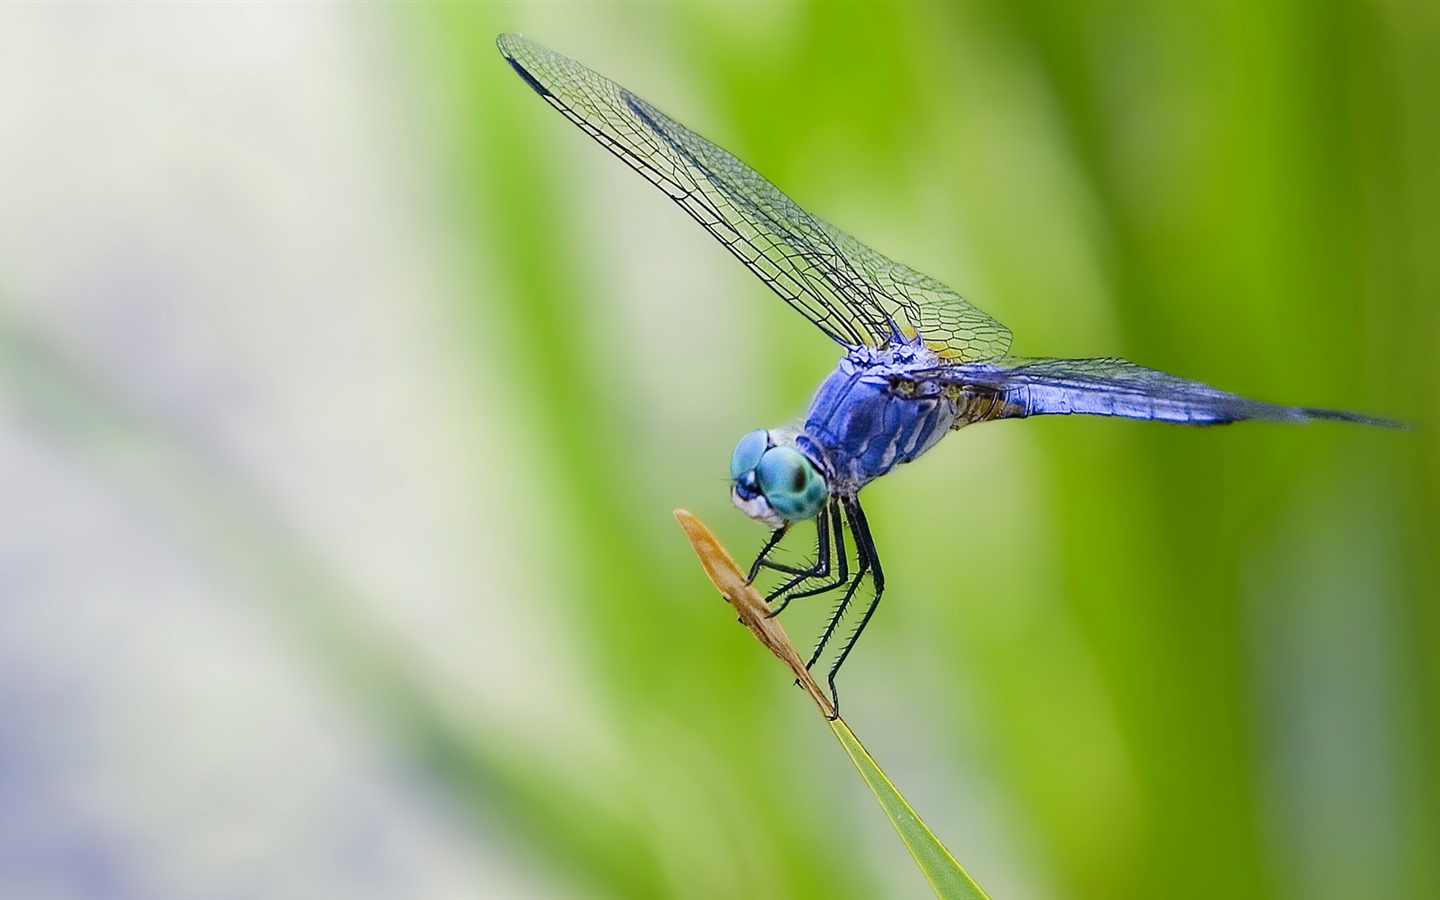 Insect close-up, dragonfly HD wallpapers #25 - 1440x900